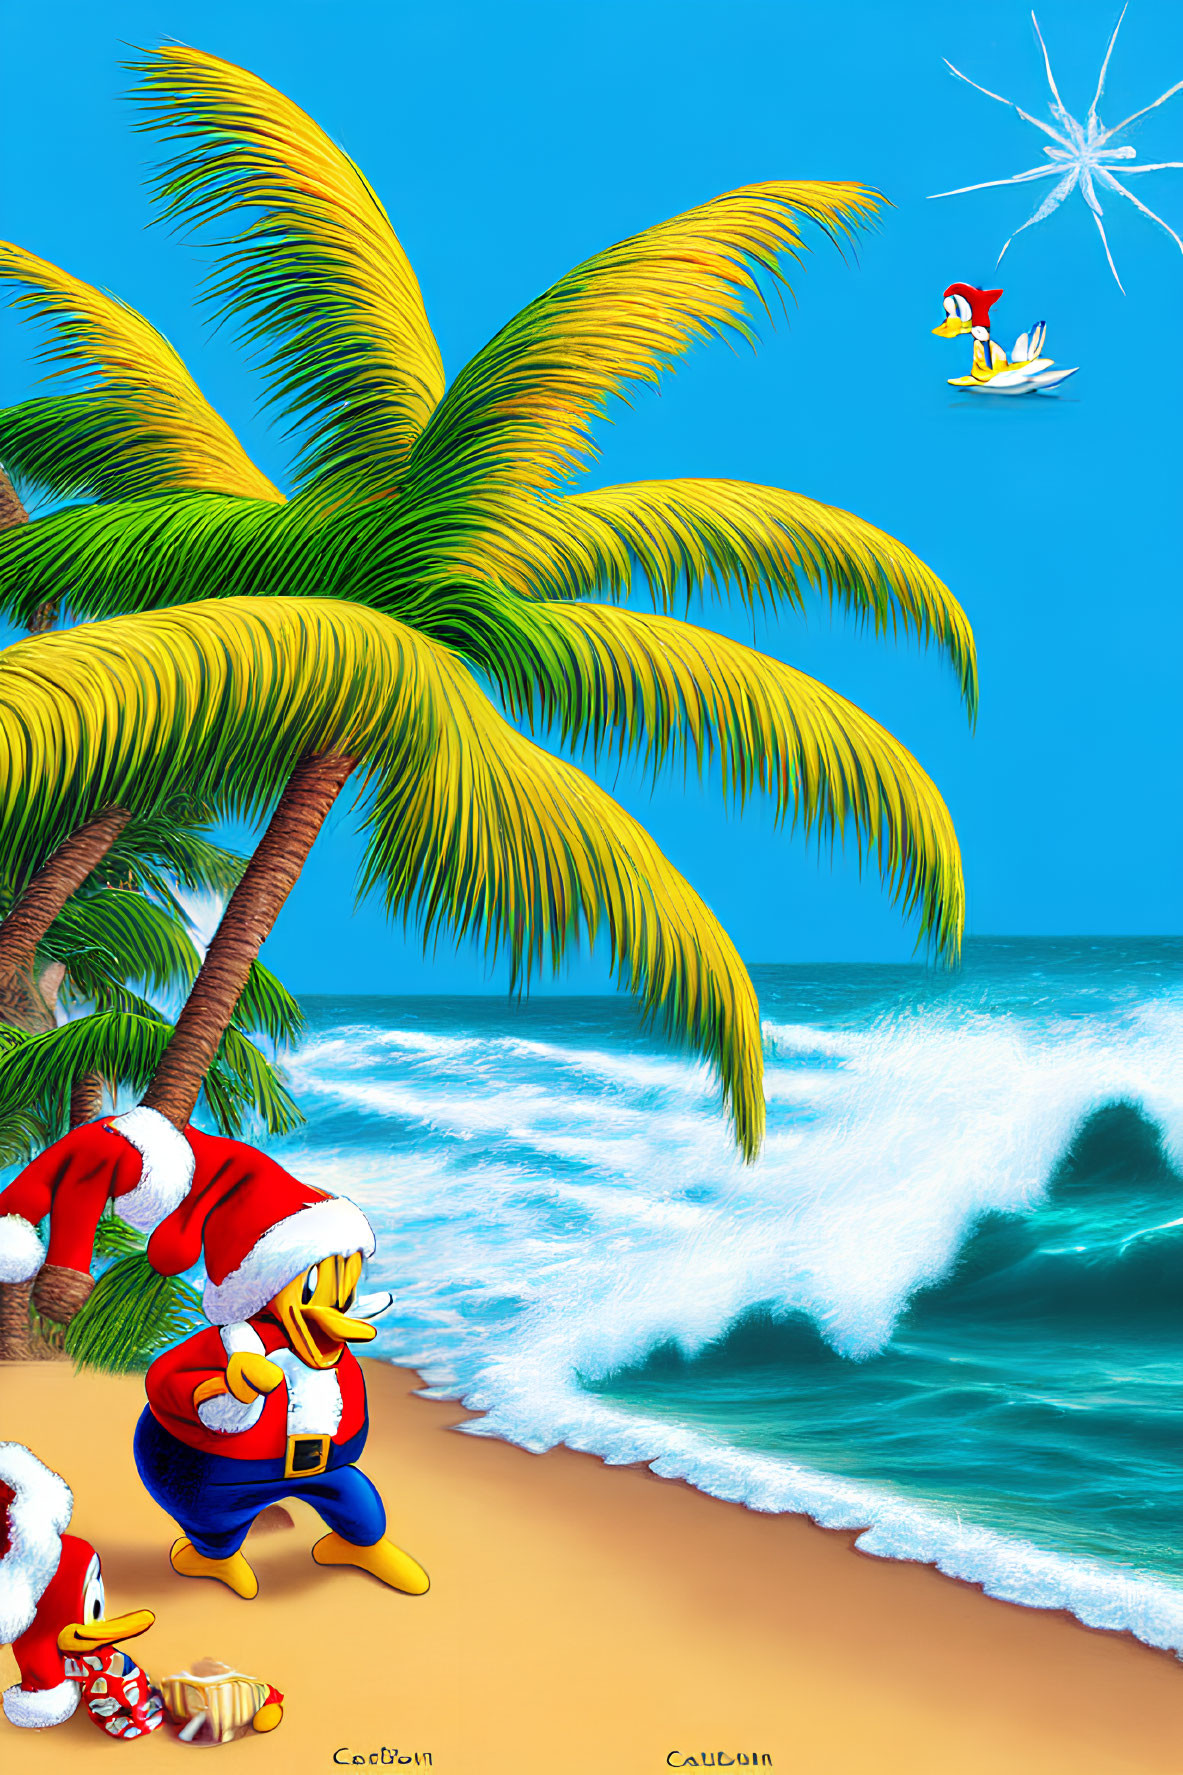 Cartoon character in Santa outfit on sunny beach with palm tree, star, and bird.